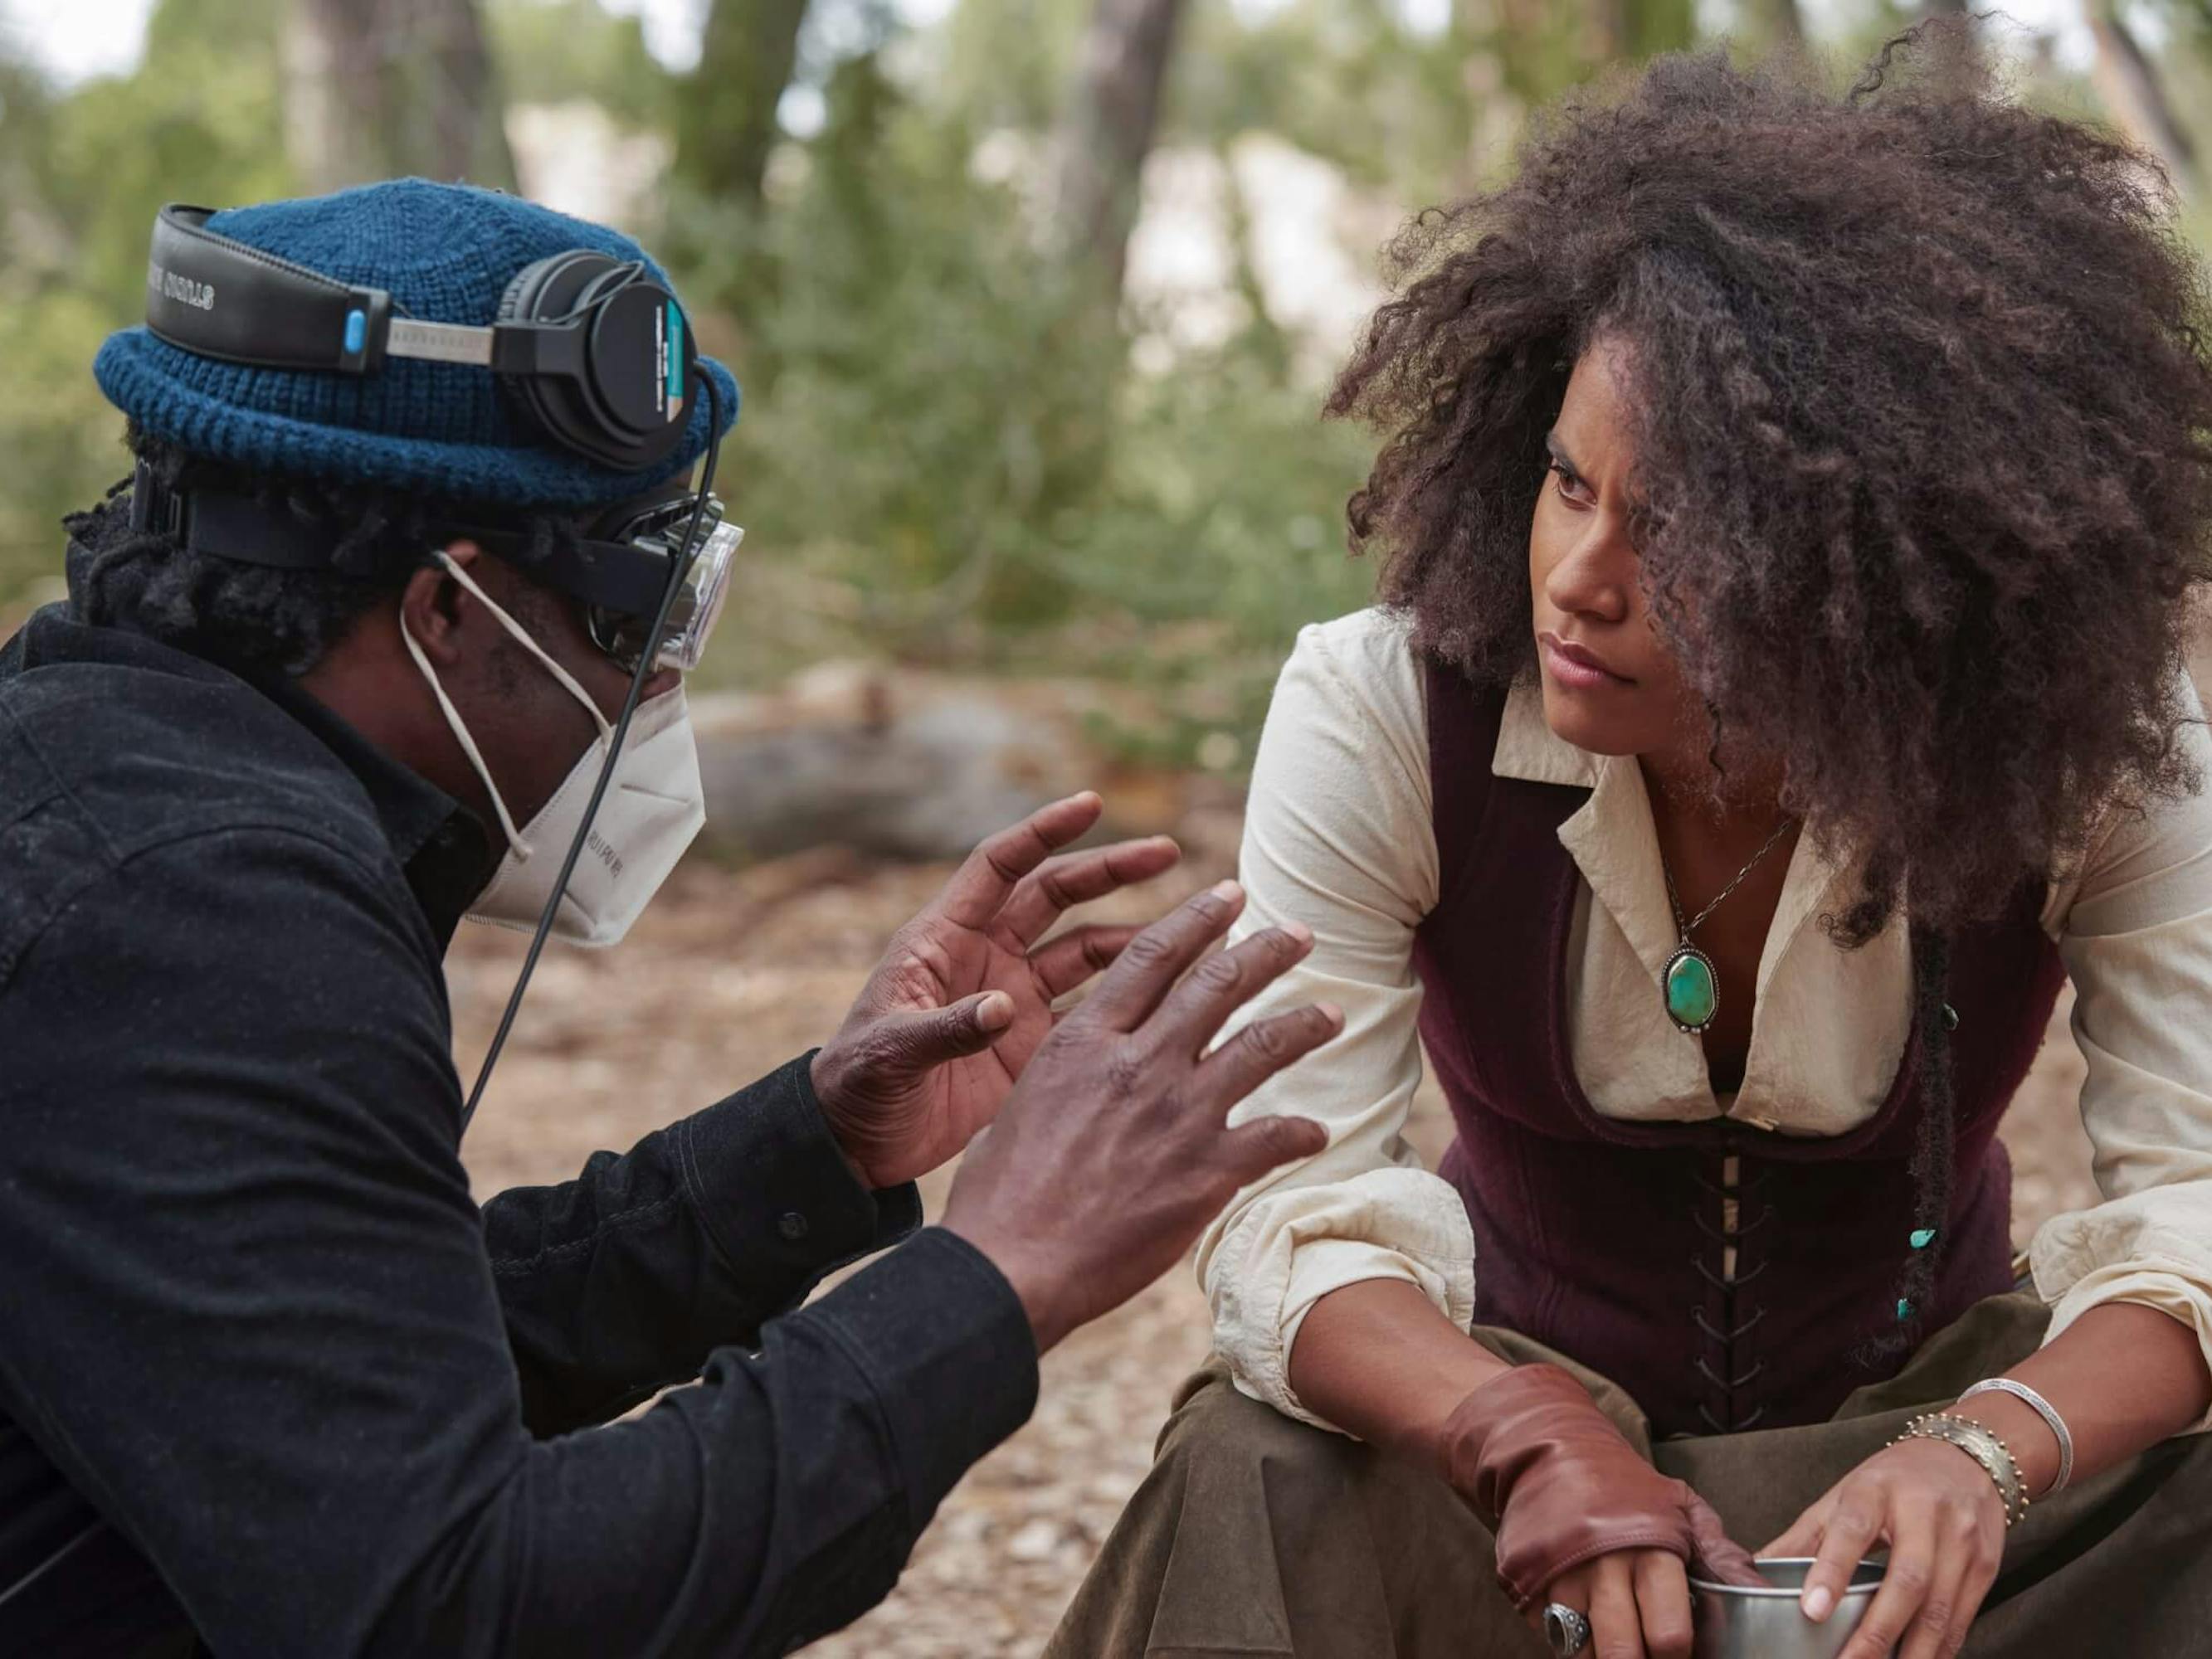 Jeymes Samuel and Zazie Beetz sit together. Samuel, in all black and a teal beanie, explains something to Beetz, who wears khaki pants, a white blouse, turquoise necklace, and brown vest.